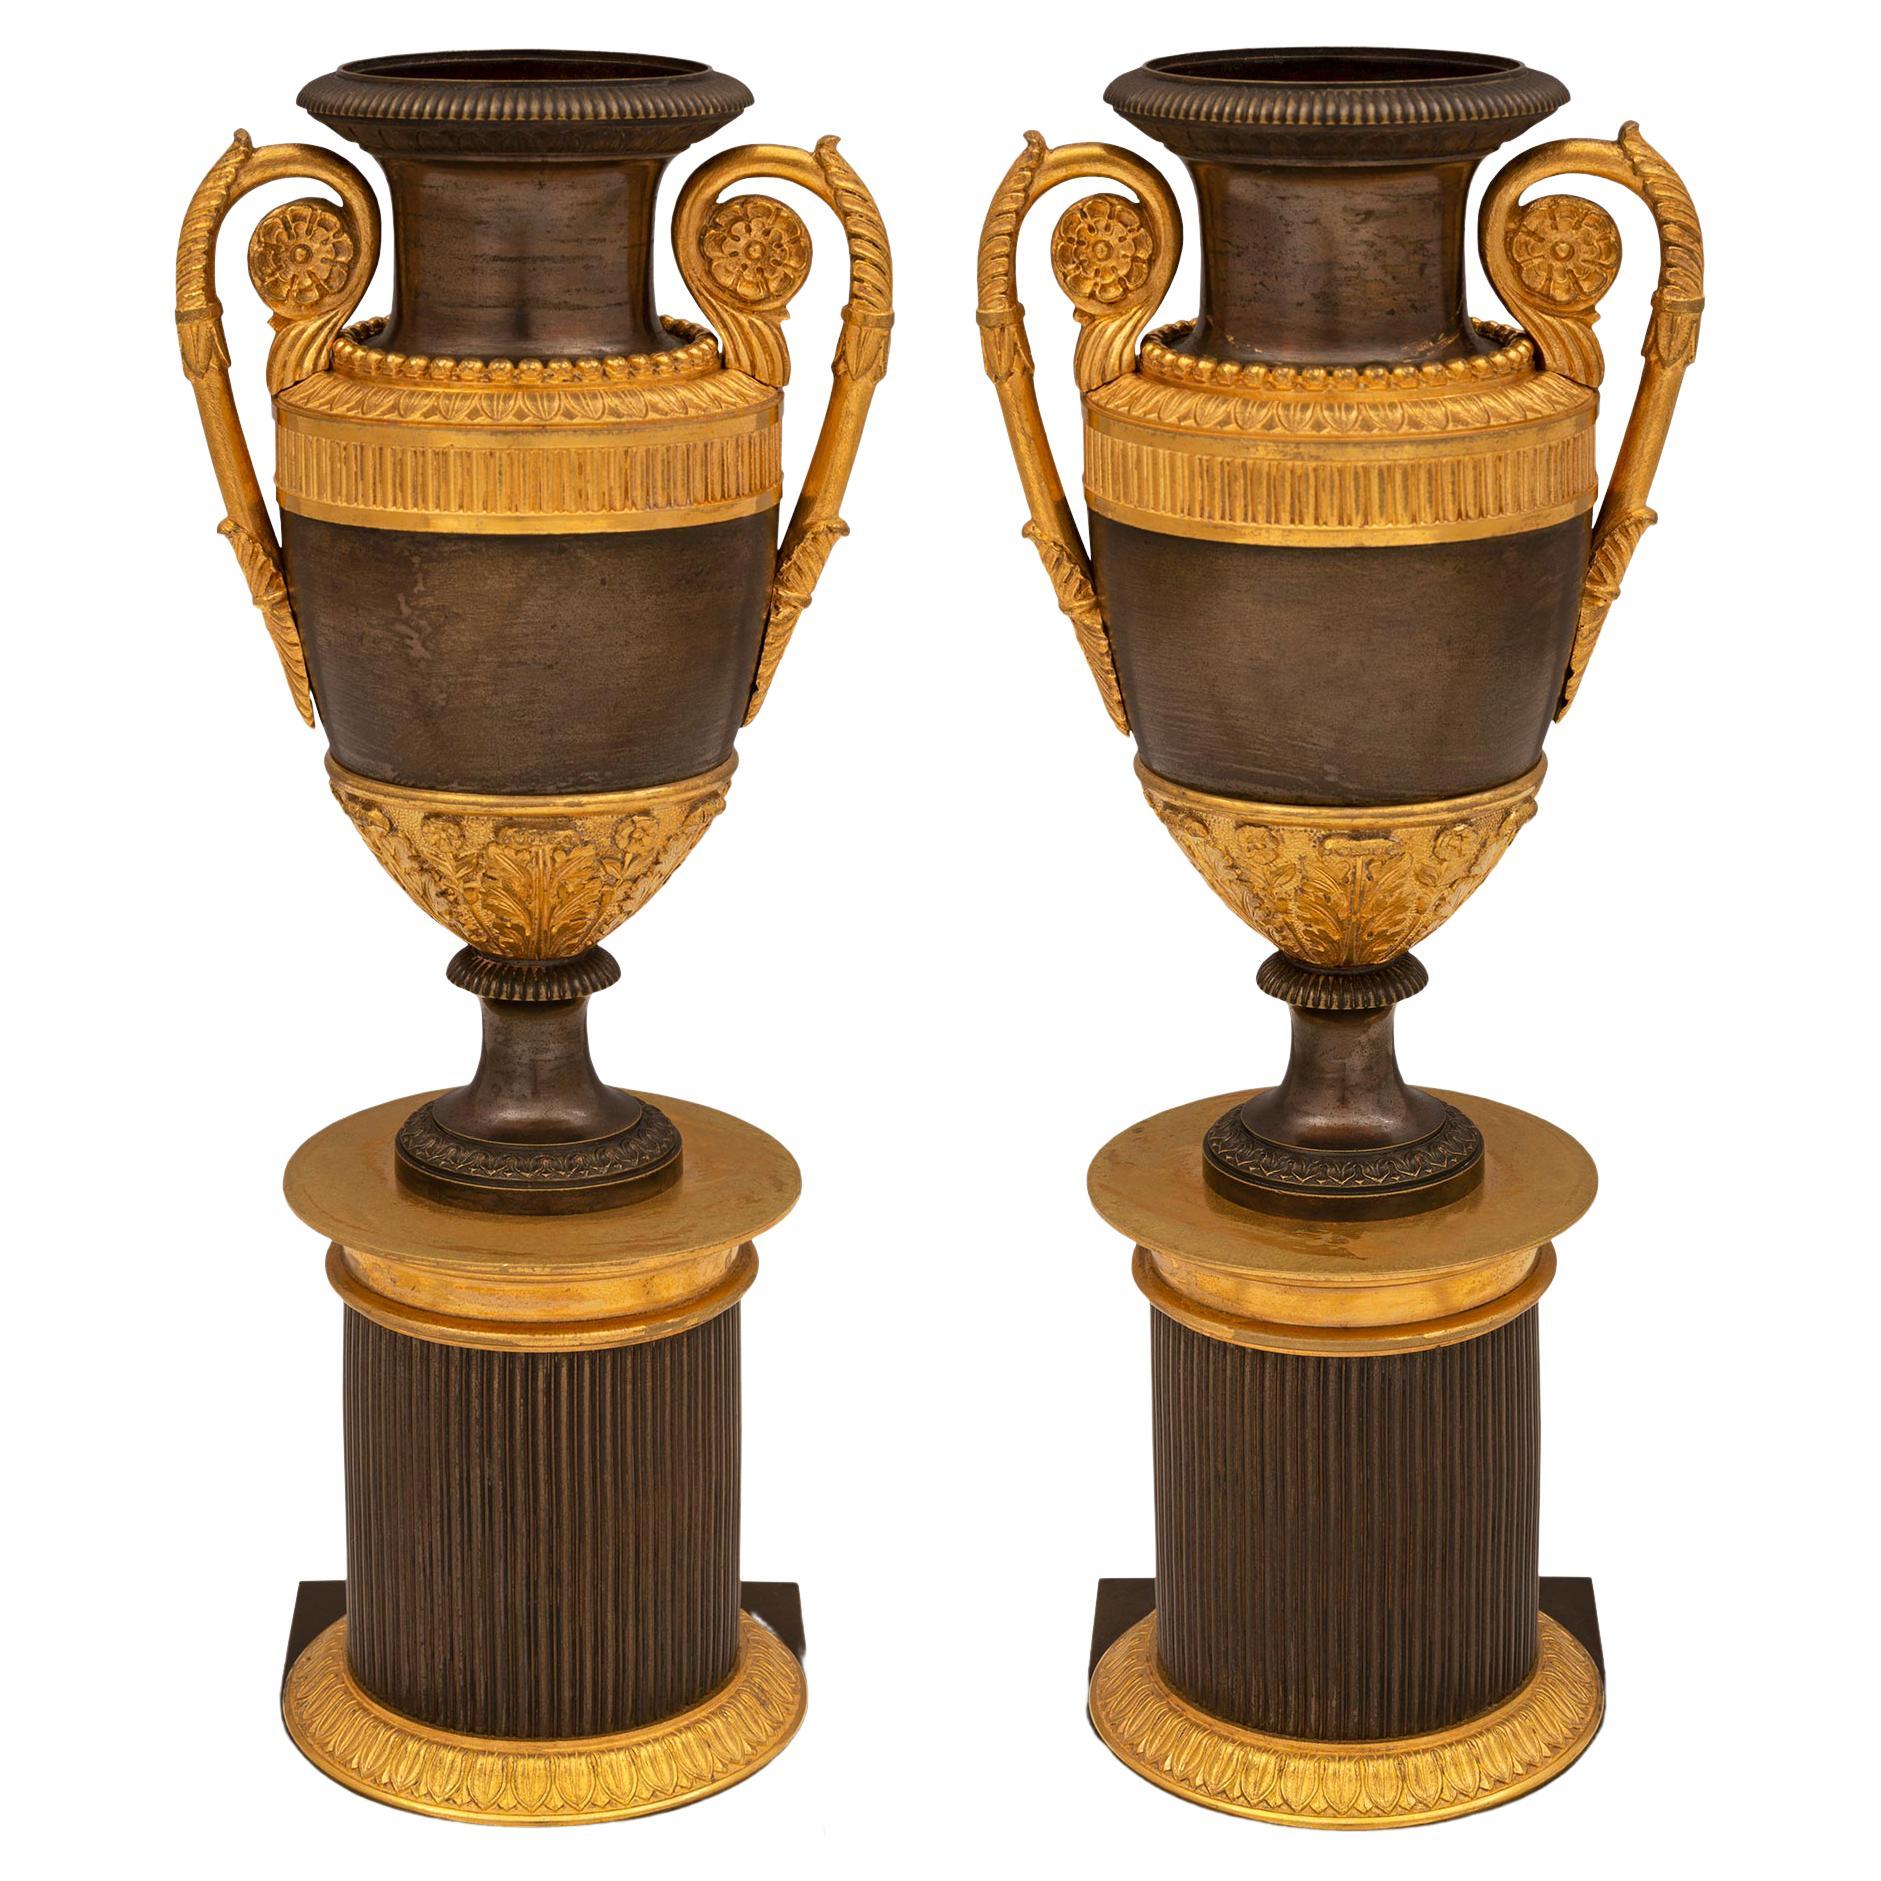 Pair of 19th Century Neoclassical Style Patinated Bronze and Ormolu Urns